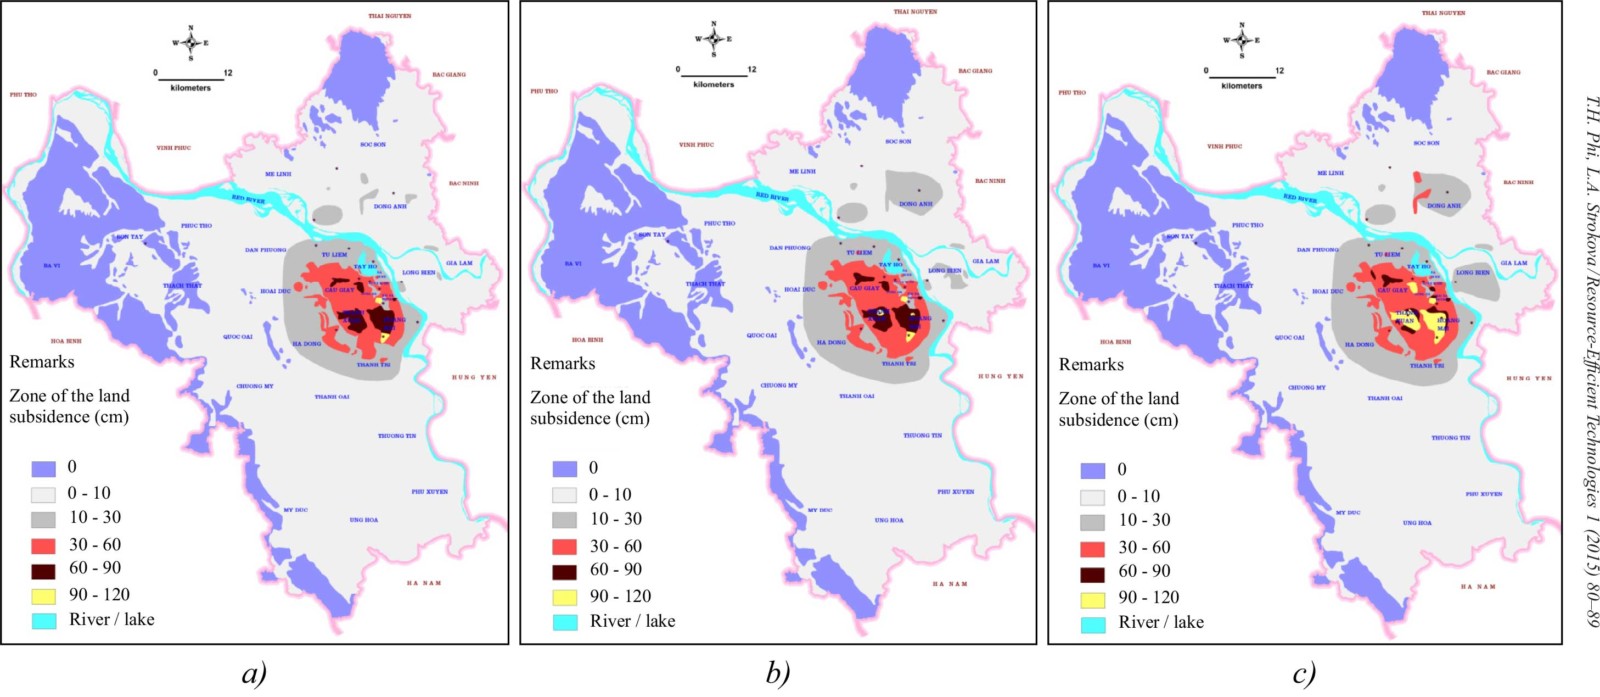  Prediction maps of the land subsidence in the Hanoi city caused by groundwater extraction in (a) 2013; (b) 2020; (c) 2030